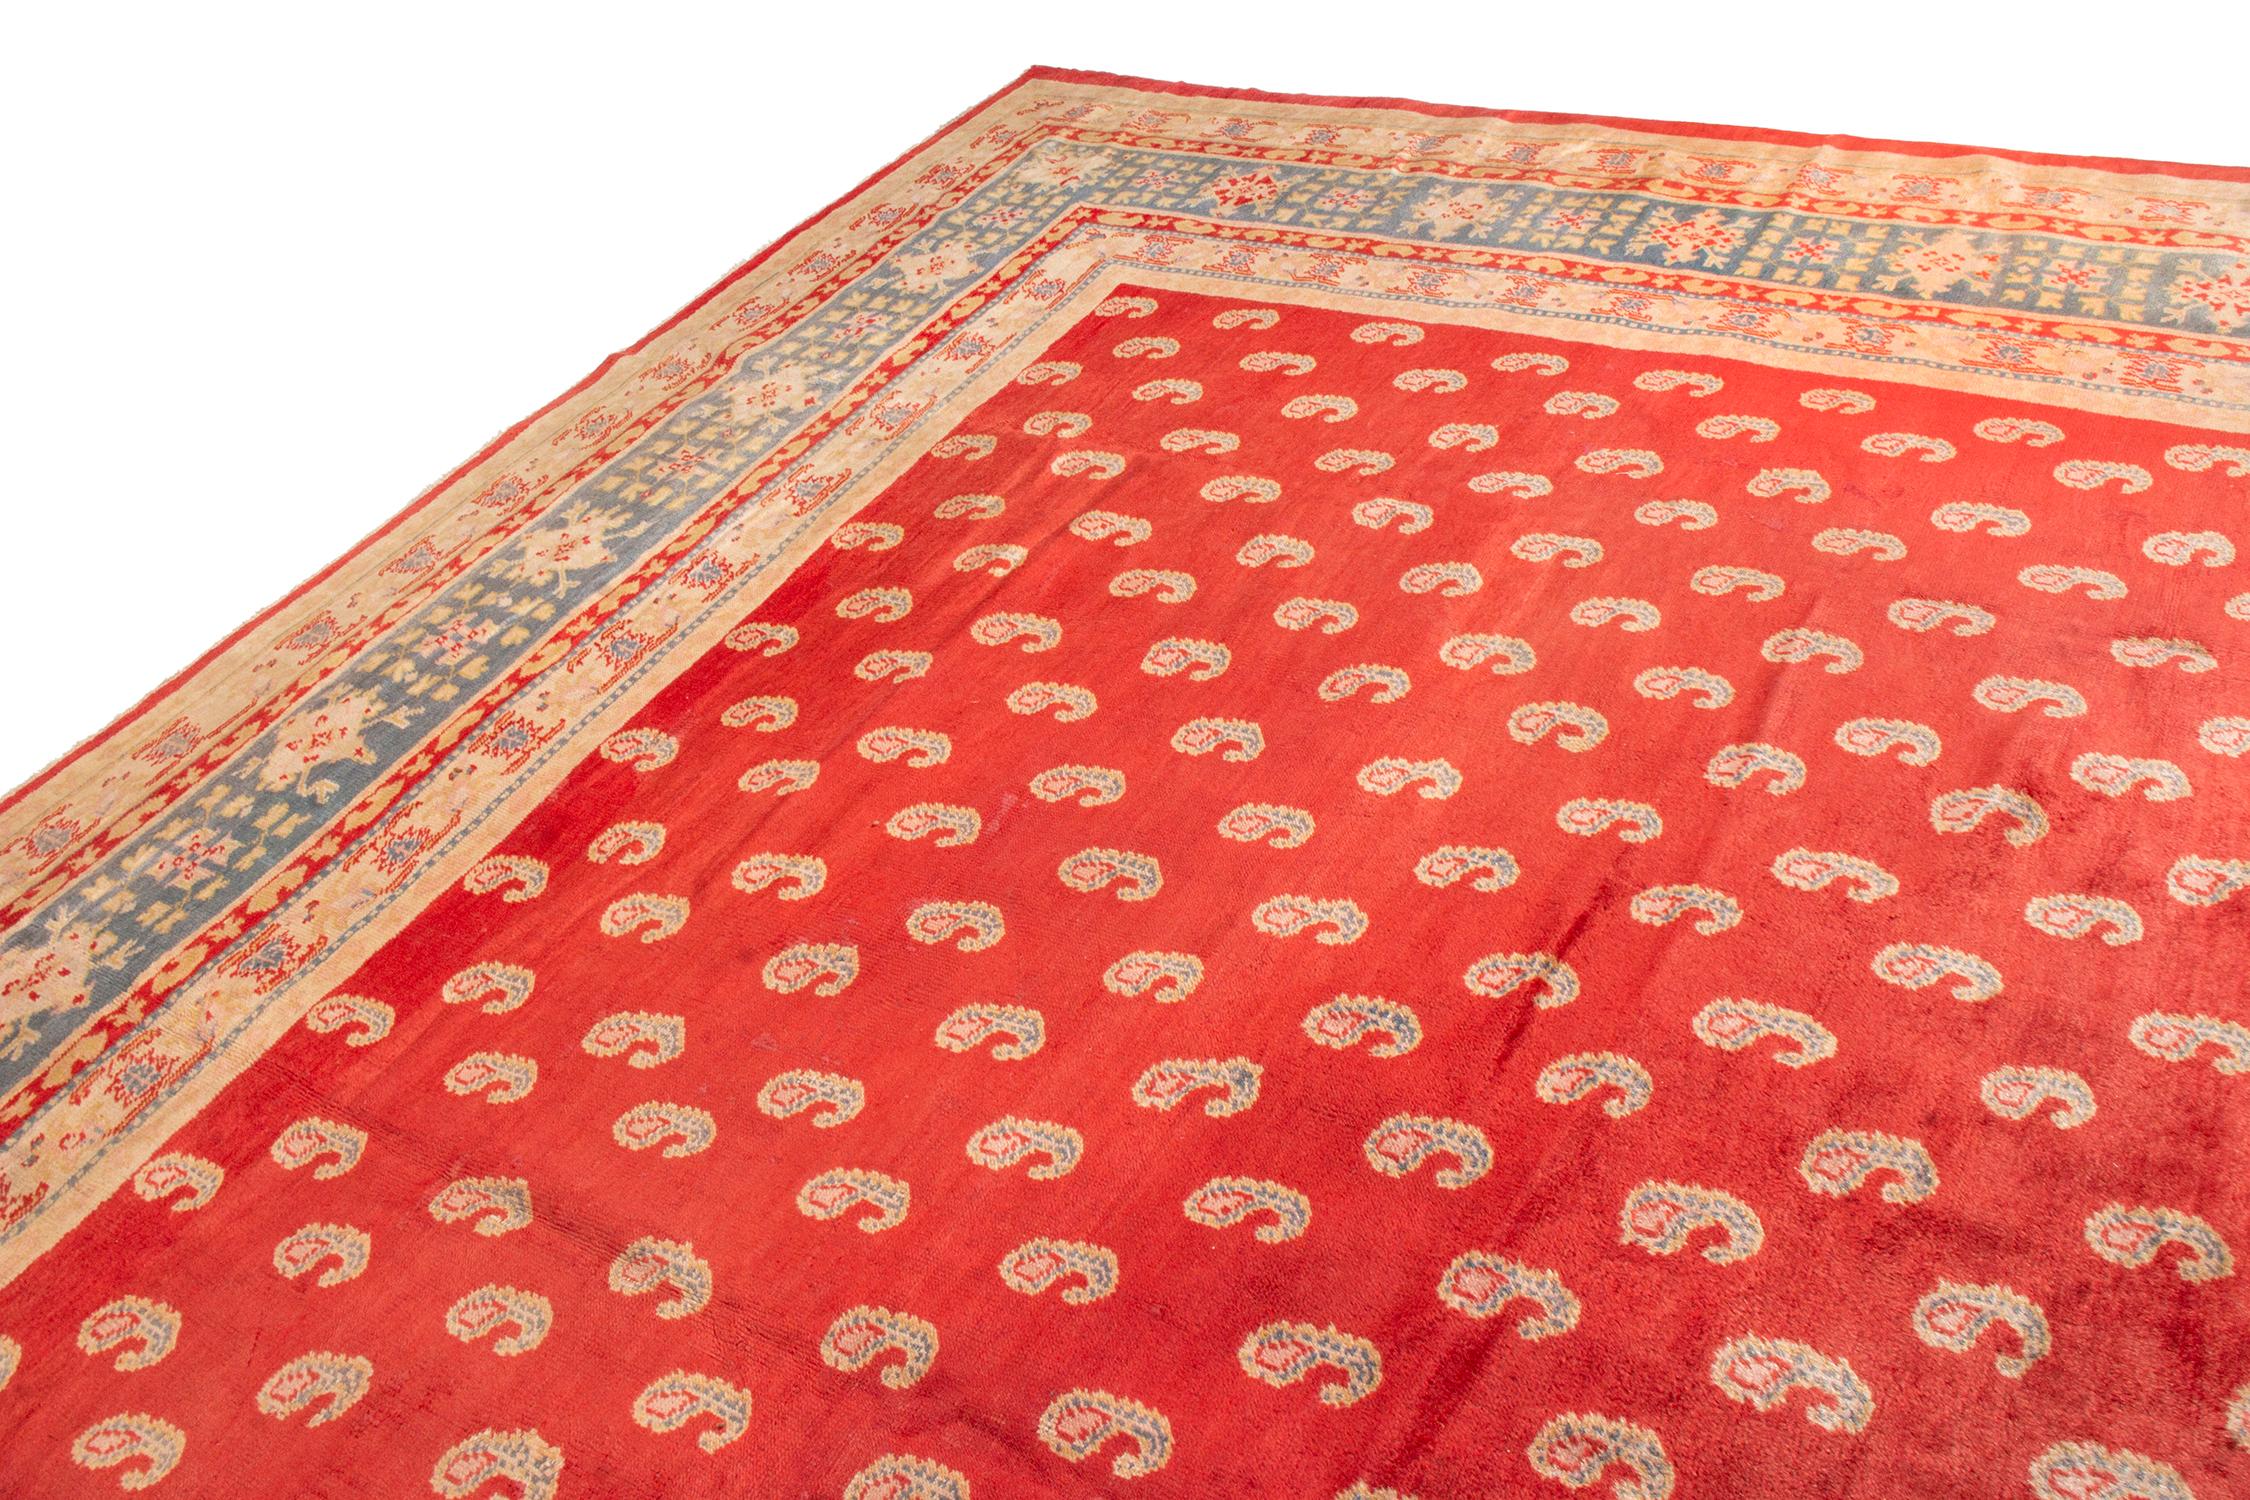 Hand knotted in wool originating from Turkey circa 1900-1910, this antique rug connotes a traditional Oushak rug design in rich red background, uplifting a venerated paisley pattern repeating in the same complementary beige-brown and blue hues